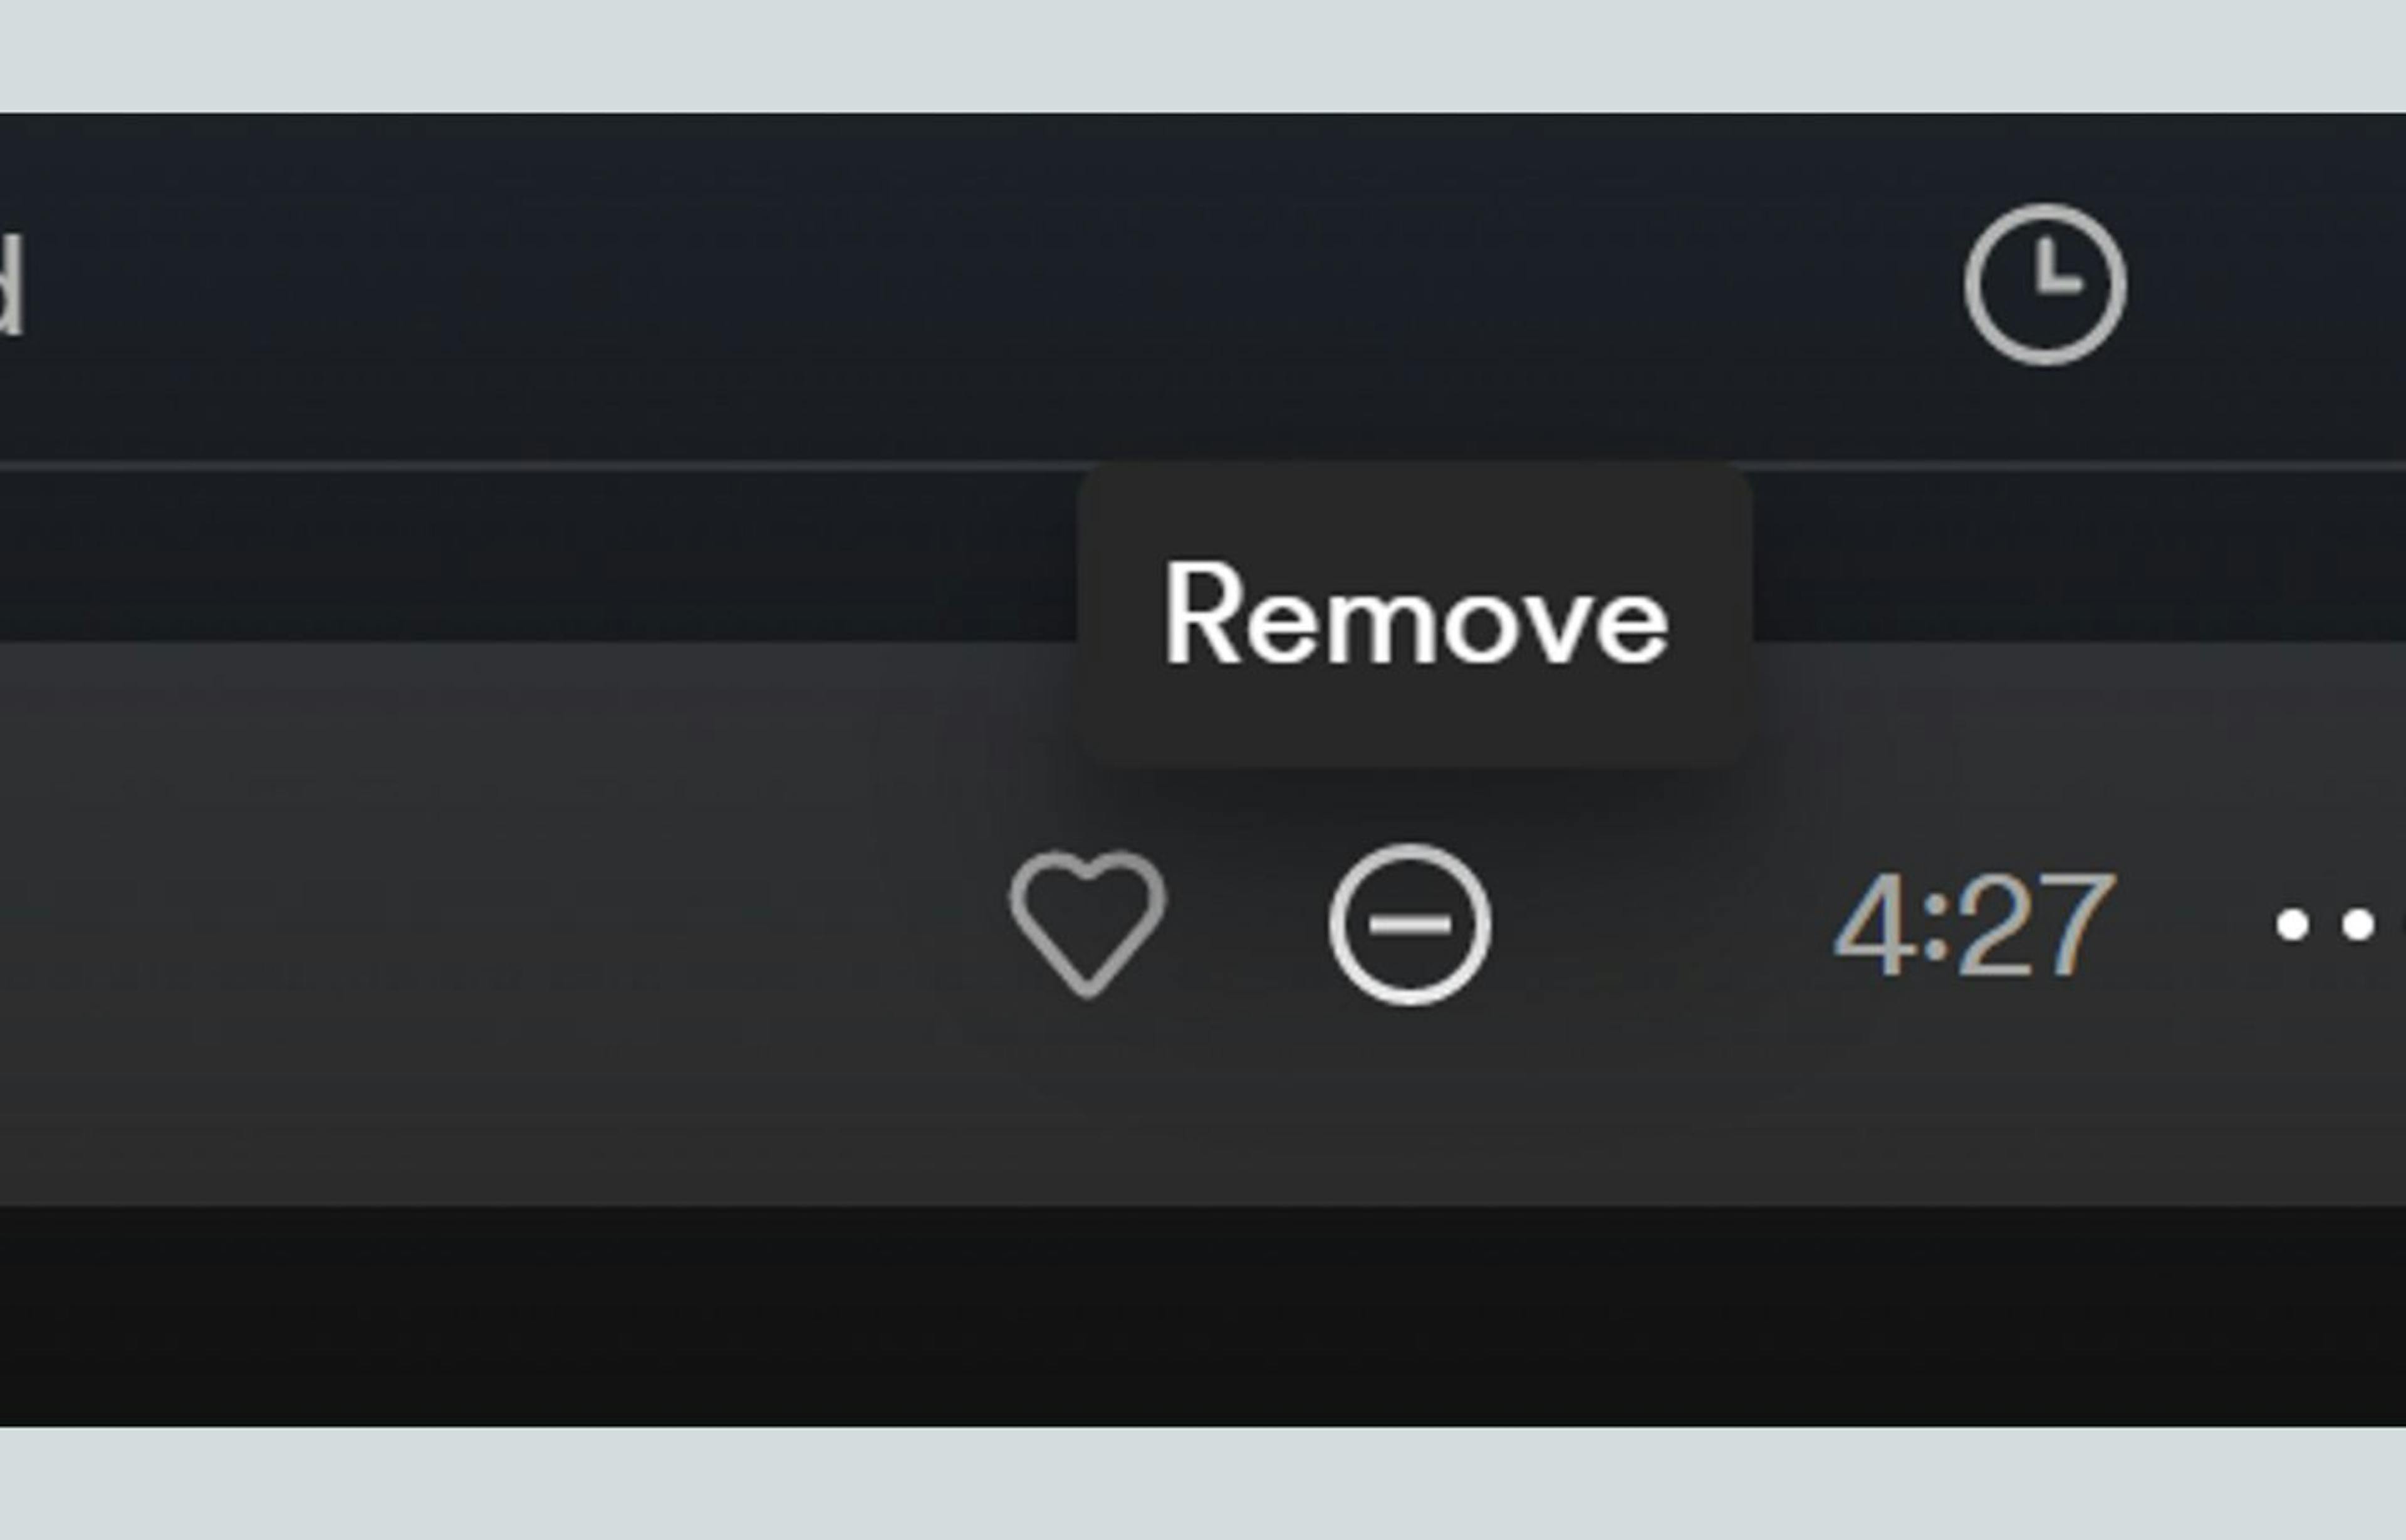 Spotify’s remove button allows users to clarify suggestions, informing the system they want to see similar songs less